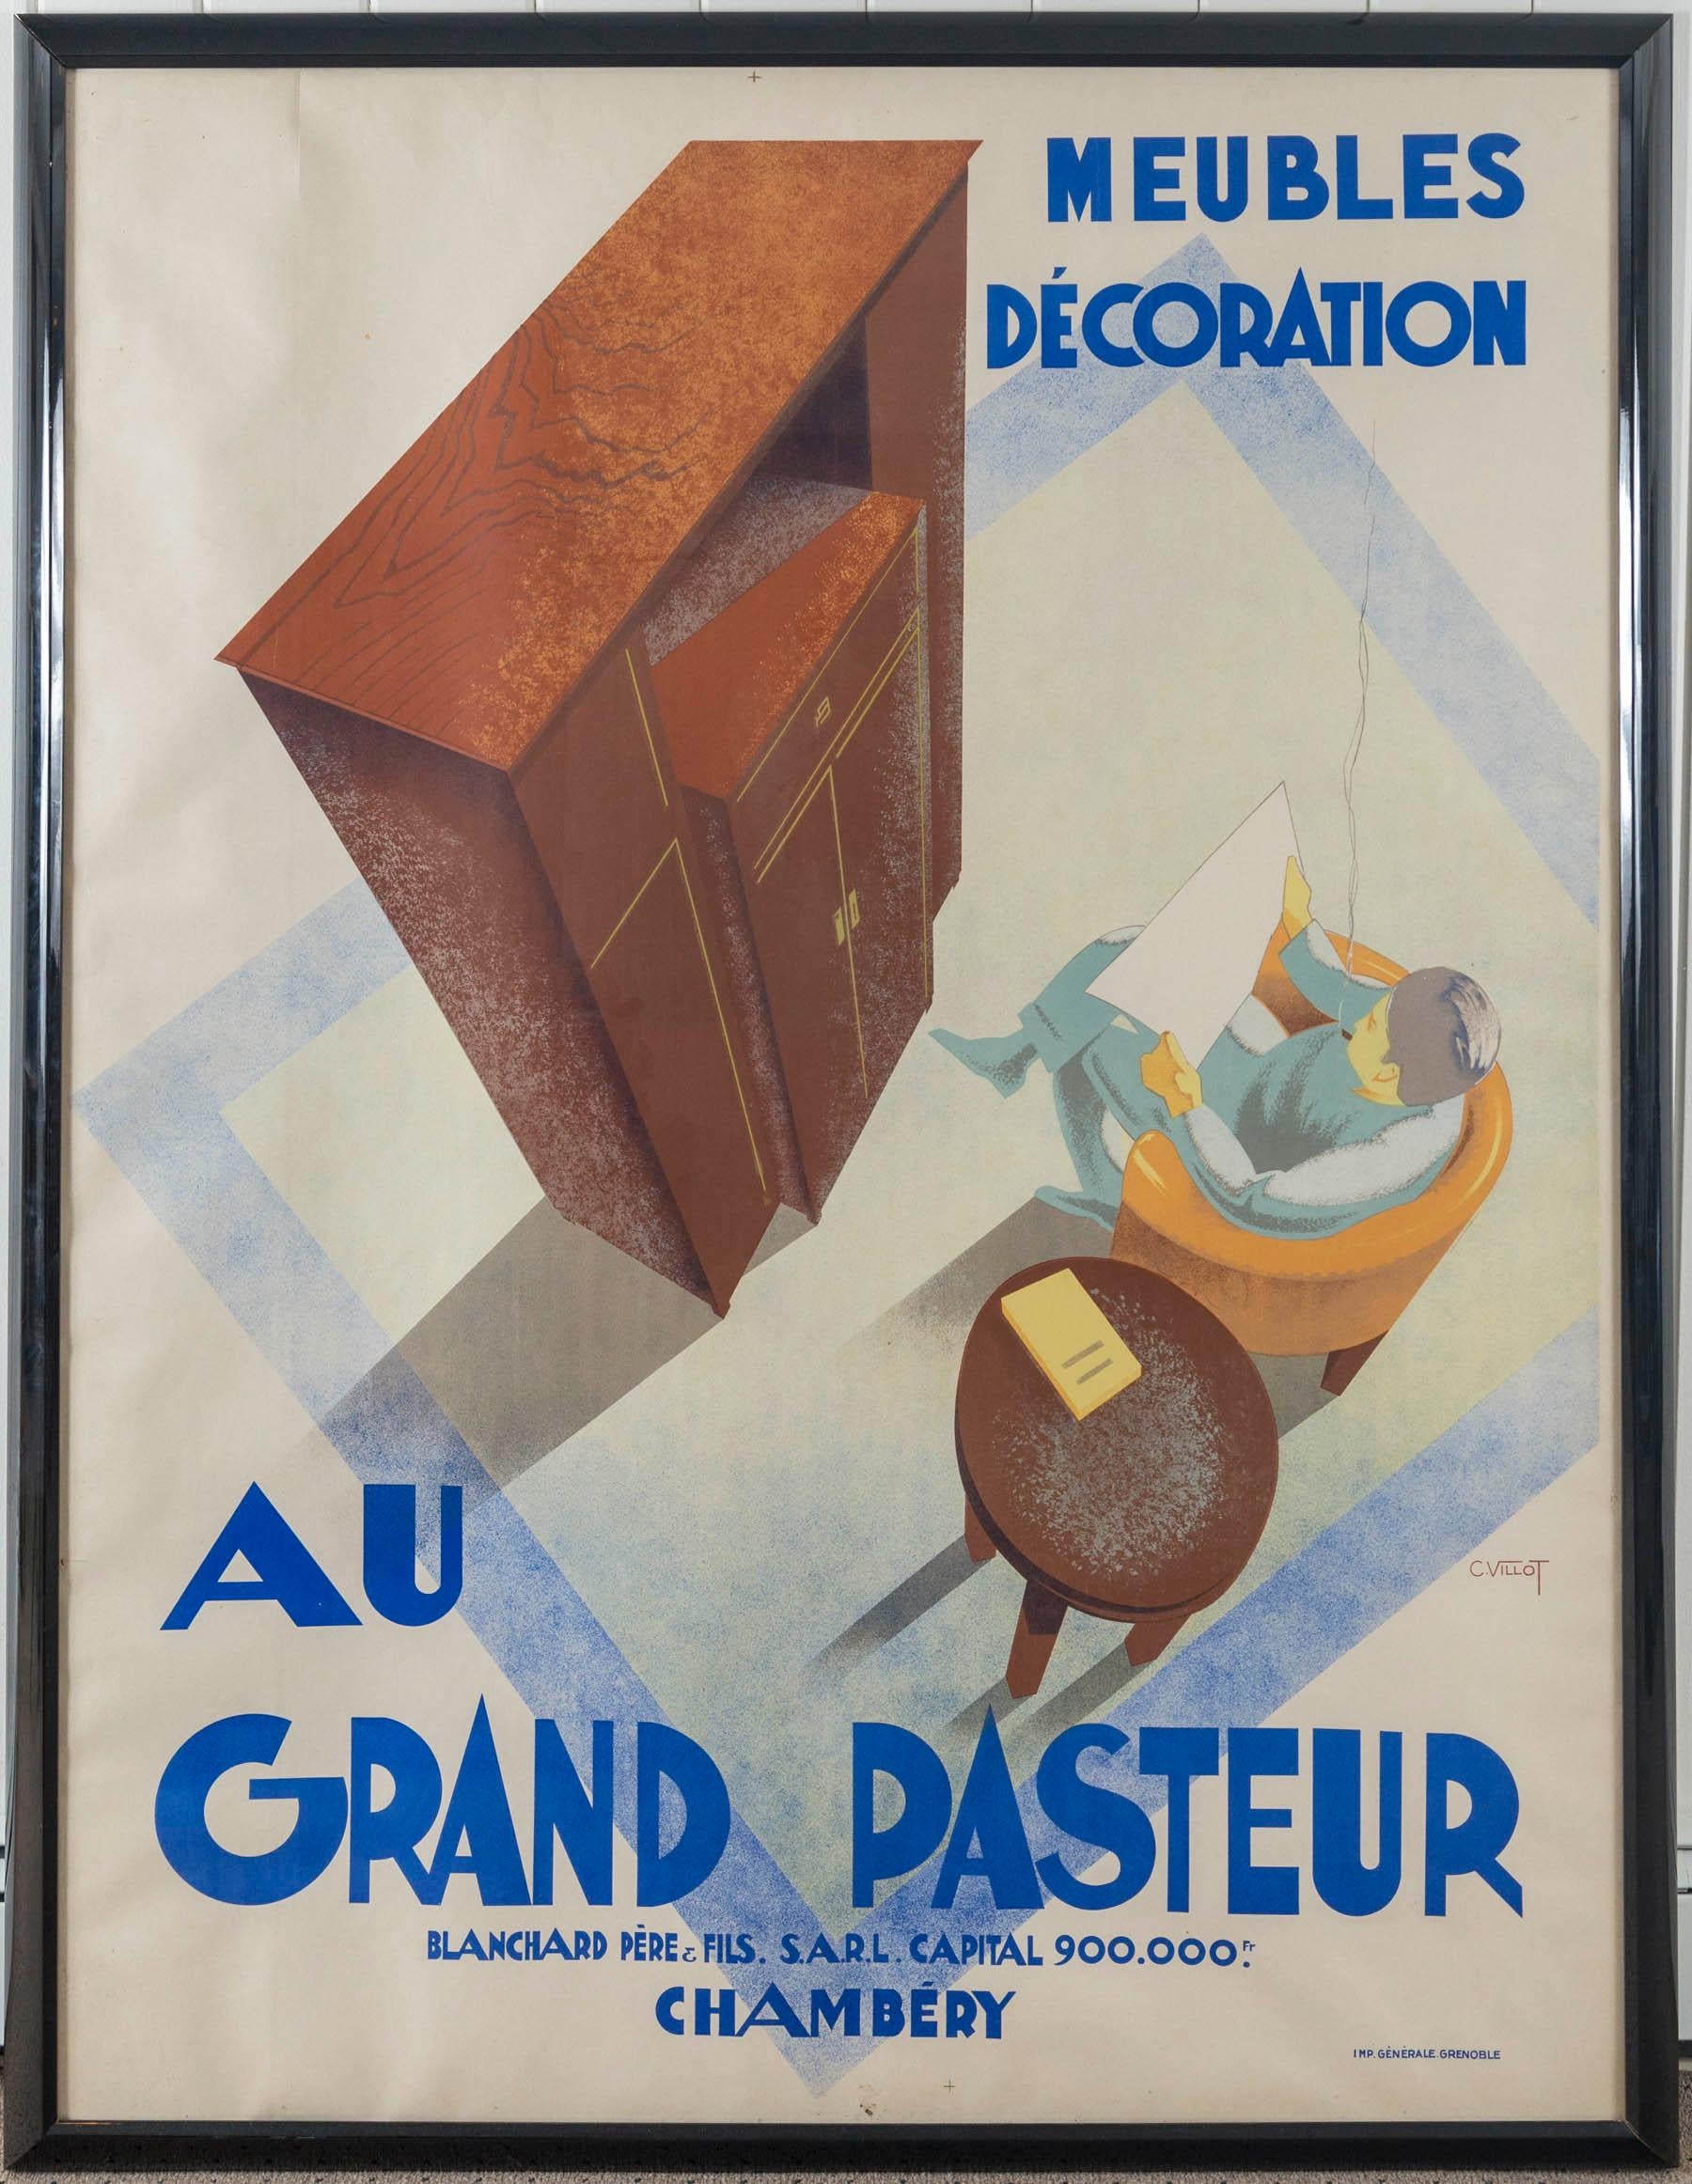 Framed French poster, 'Au Grand Pasteur' by C. Villot, France, 1935. An art deco advertisement for a furniture store located in Chambery, France. The overall design features a dramatic perspective, highlighting the art deco furniture.